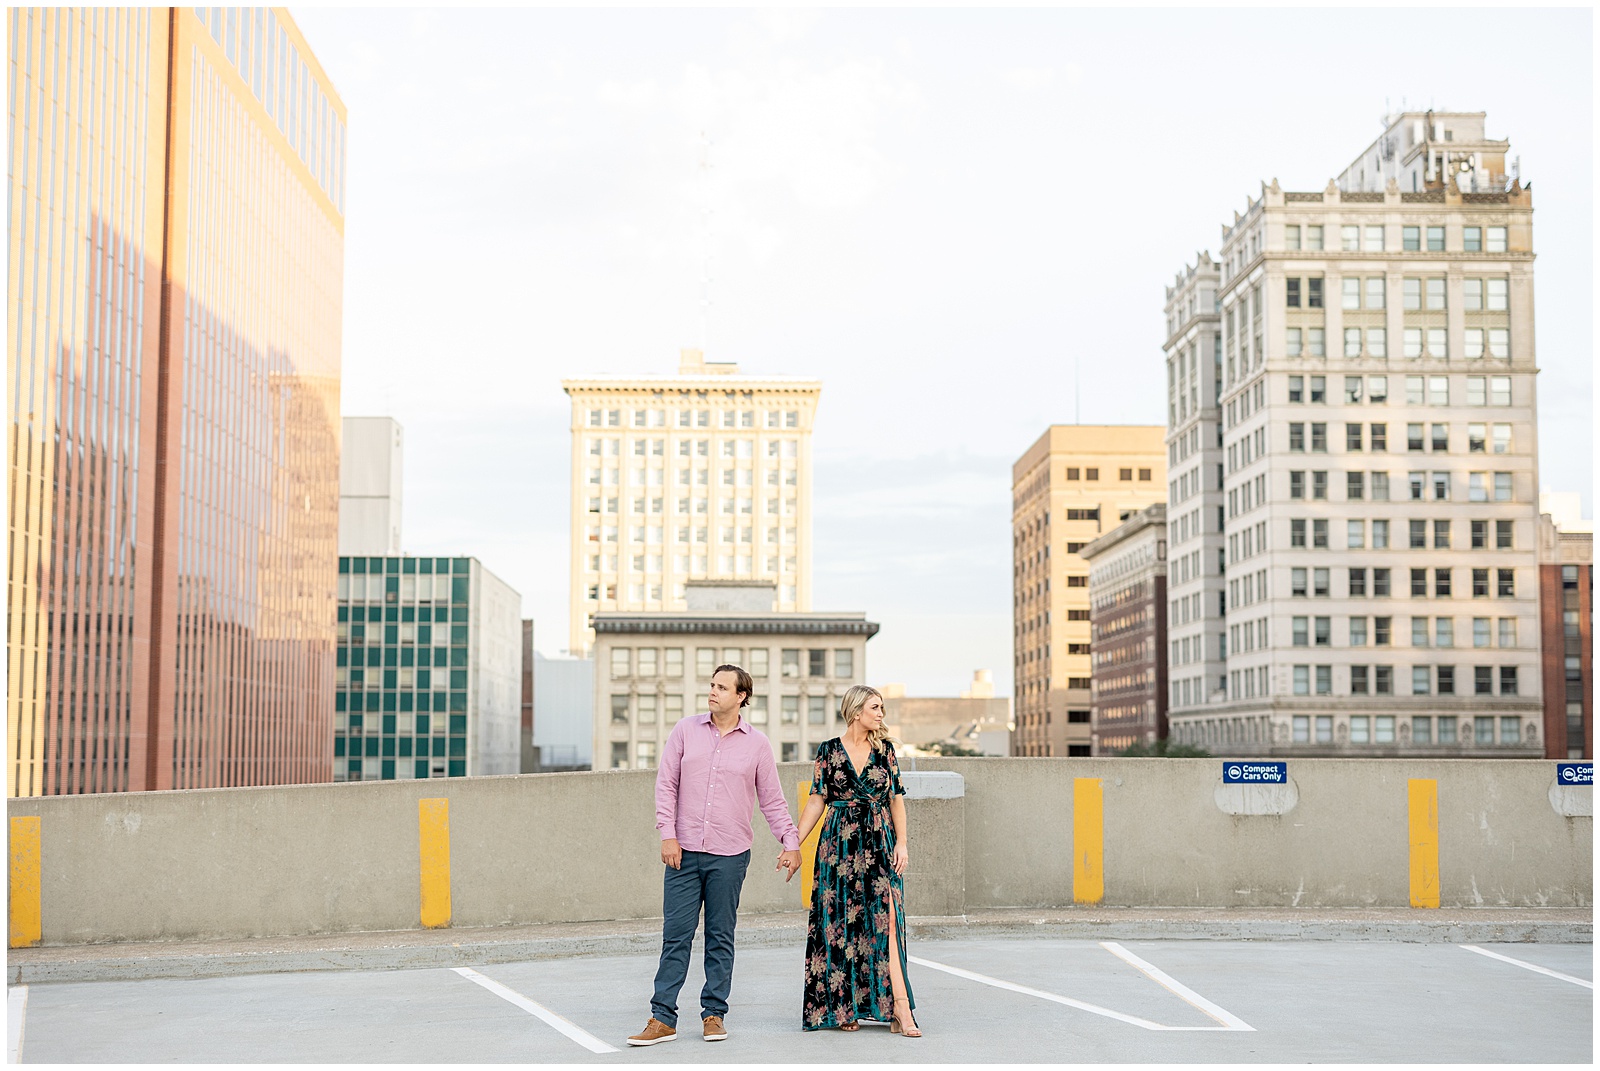 Omaha engagement session,downtown omaha engagement session,downtown omaha session,omaha engagement photographer,omaha wedding photographer,ted and wally's engagement session. ice cream engagement session,